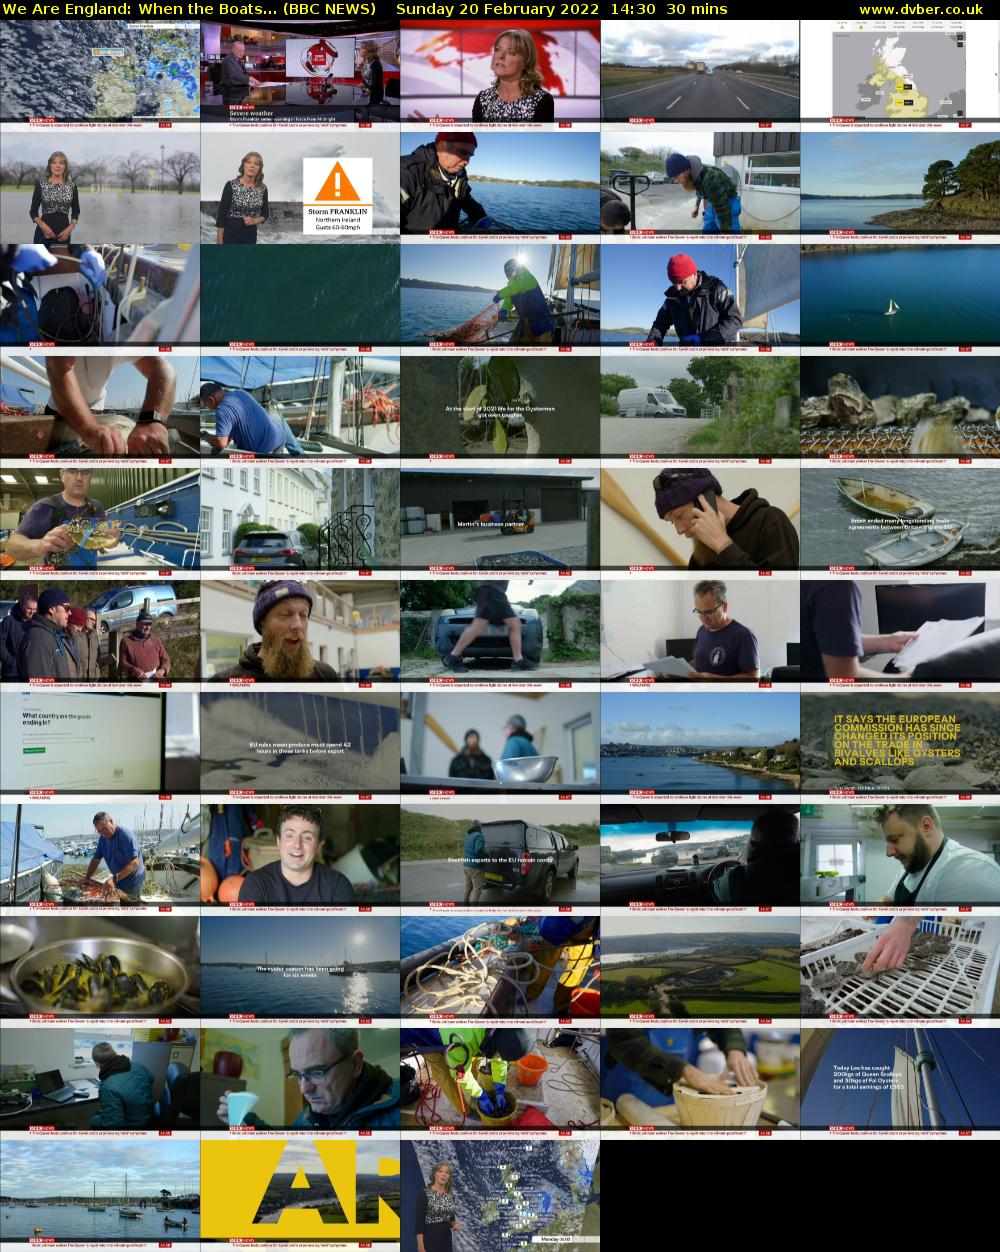 We Are England: When the Boats... (BBC NEWS) Sunday 20 February 2022 14:30 - 15:00